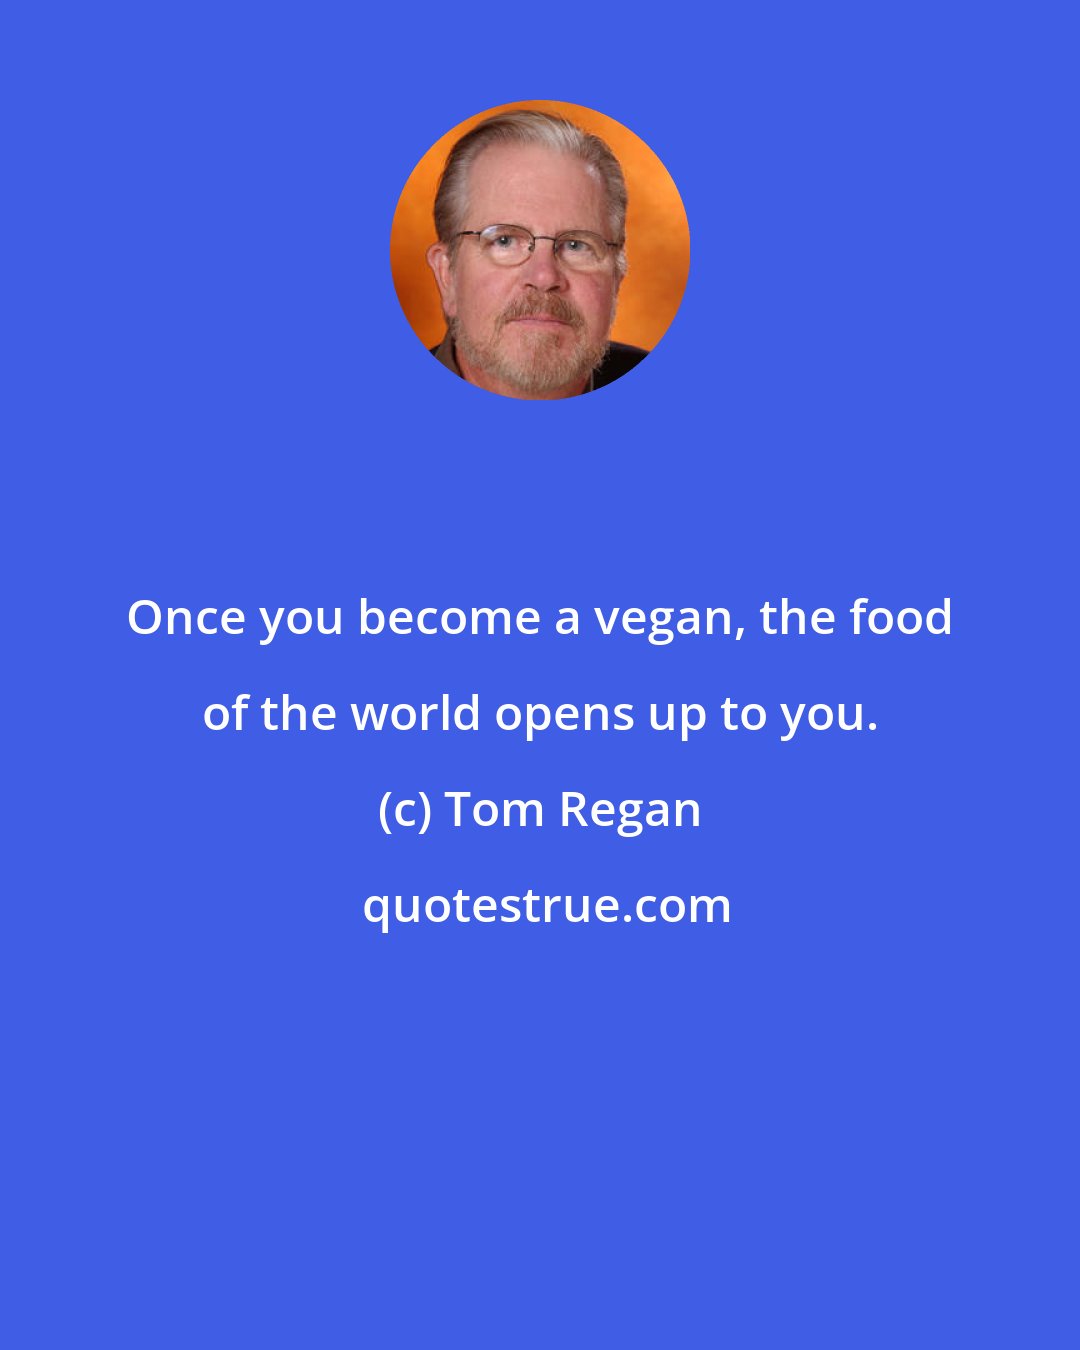 Tom Regan: Once you become a vegan, the food of the world opens up to you.